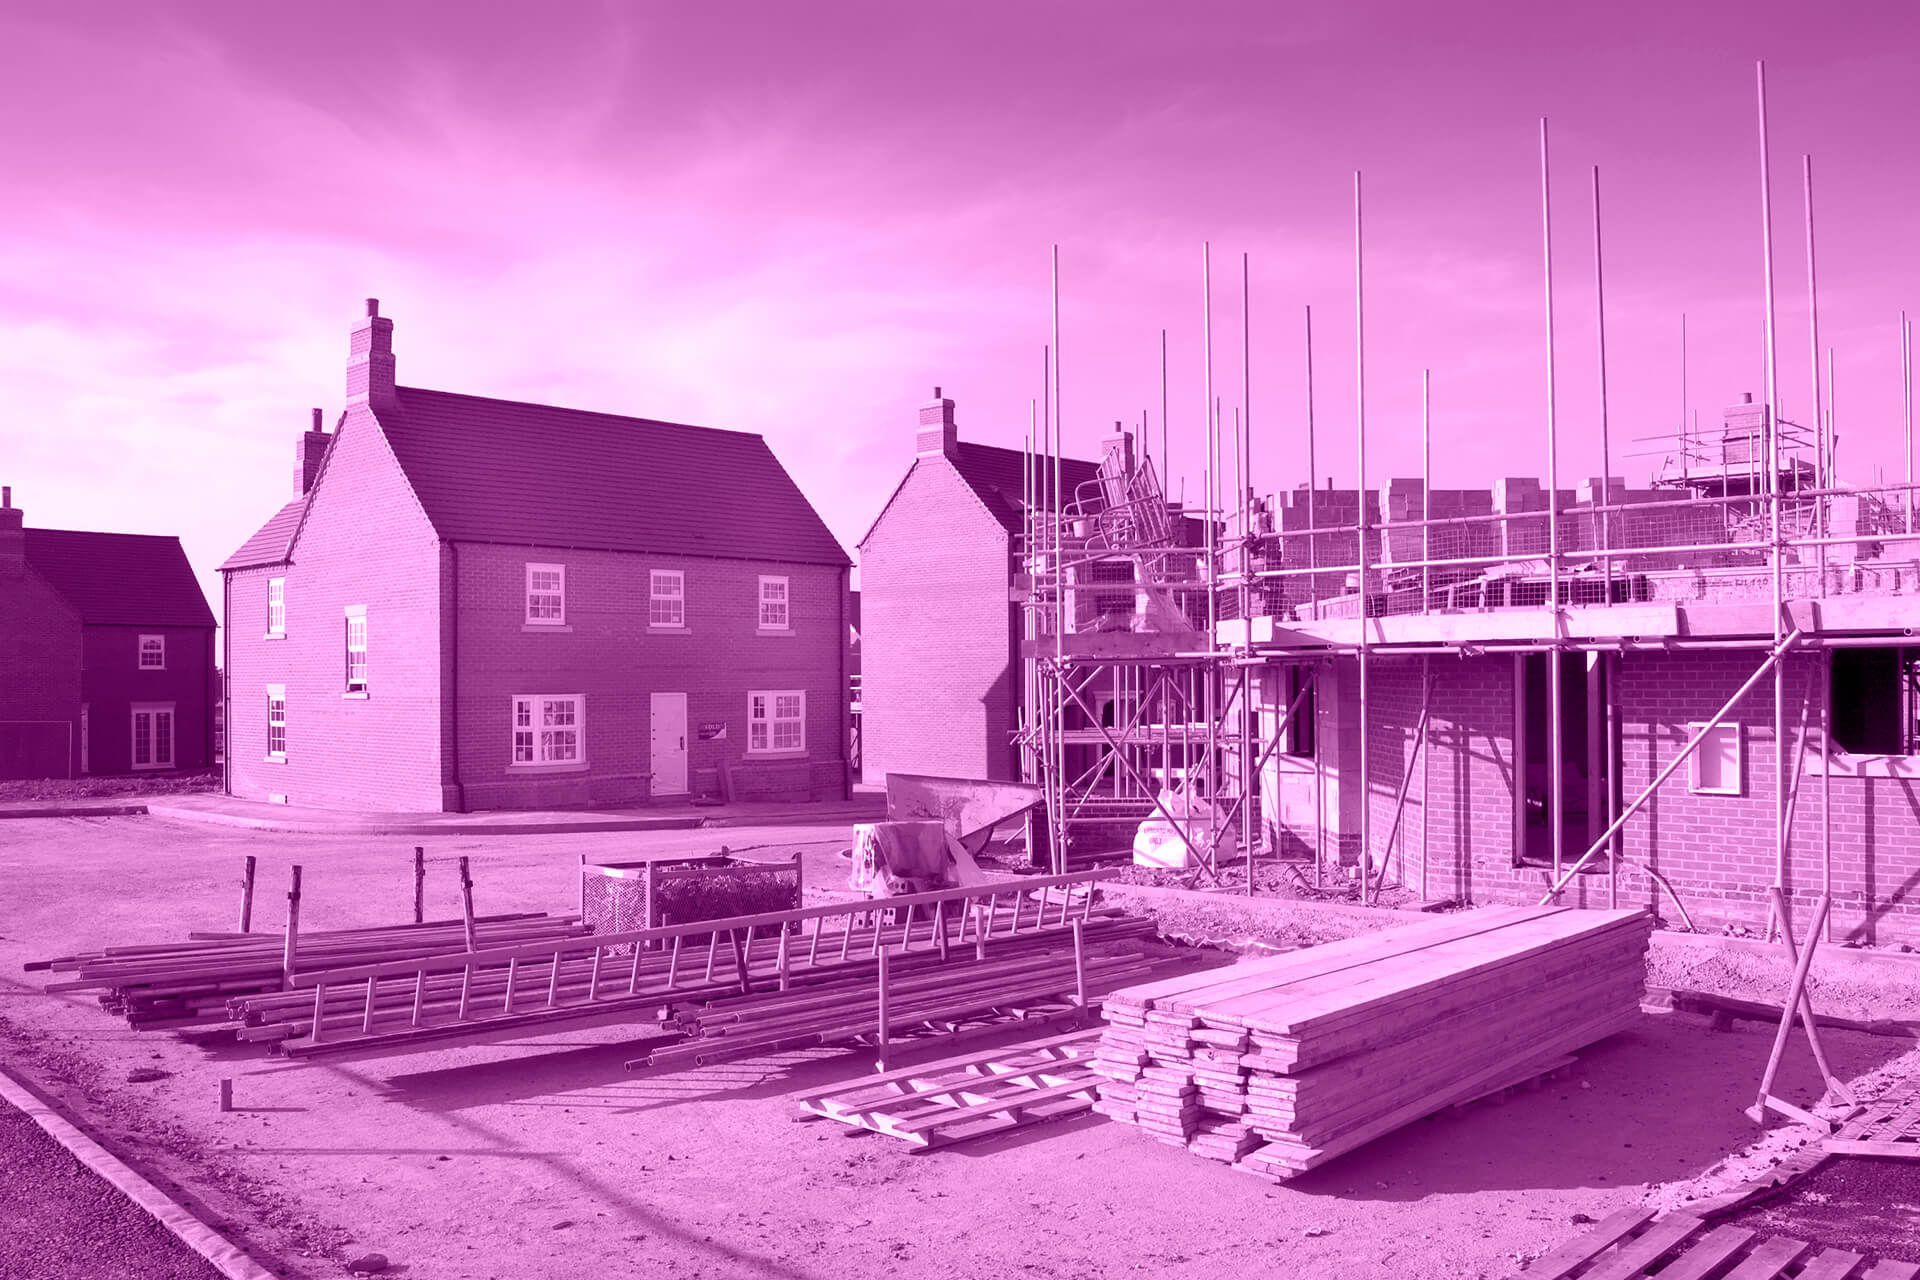 New homes under construction - with purple tinge